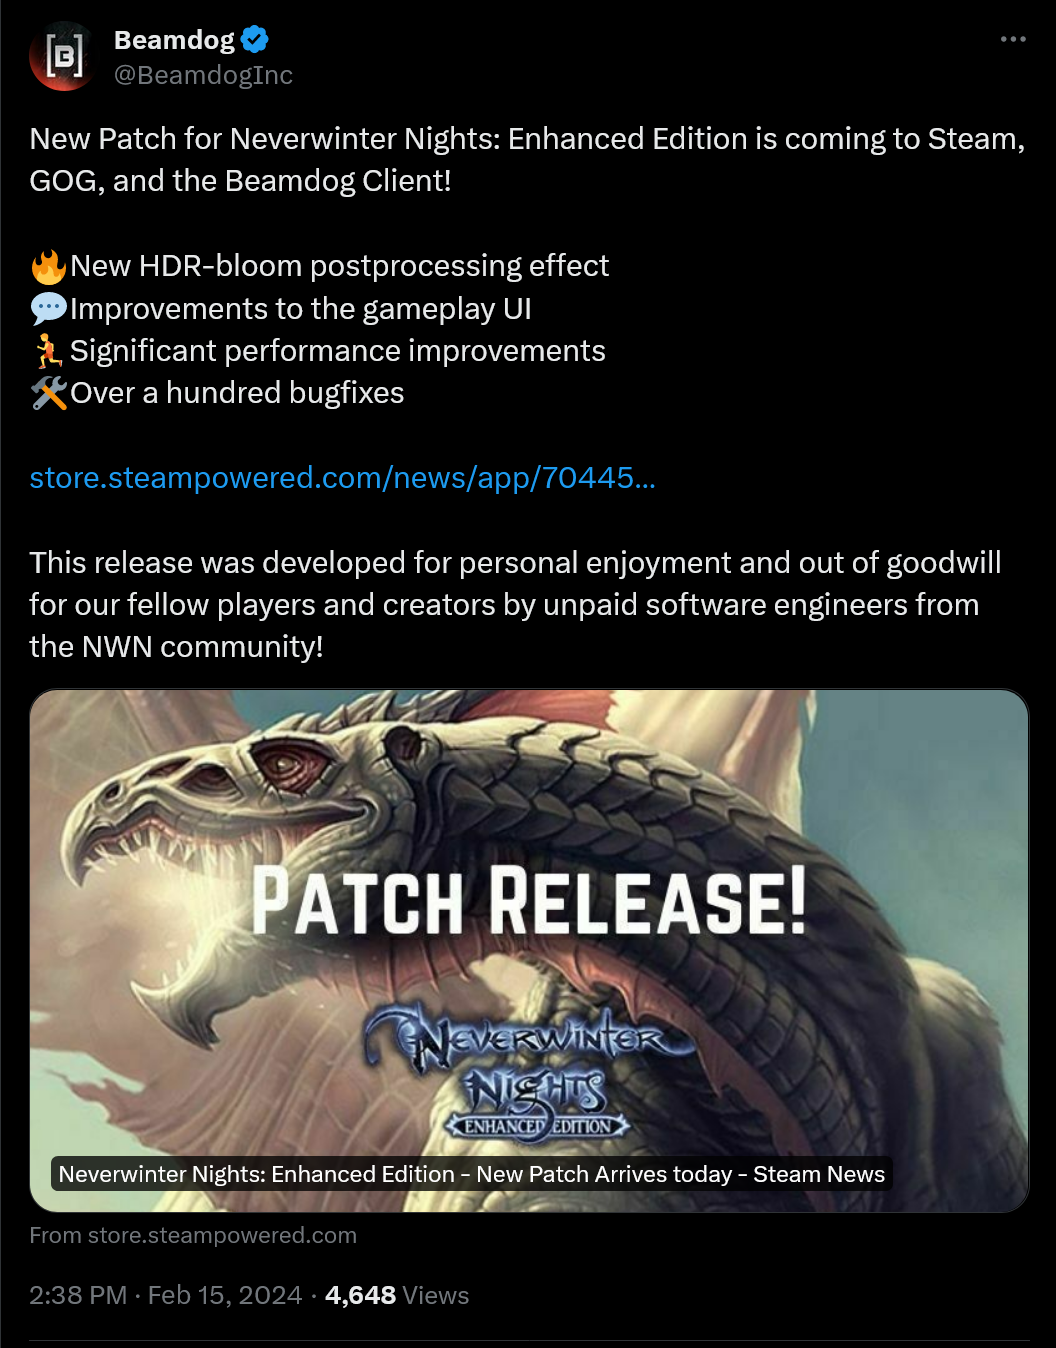 New Patch for Neverwinter Nights: Enhanced Edition is coming to Steam, GOG, and the Beamdog Client! 🔥New HDR-bloom postprocessing effect 💬Improvements to the gameplay UI 🏃Significant performance improvements 🛠️Over a hundred bugfixes https://store.steampowered.com/news/app/704450/view/7597079377547967509